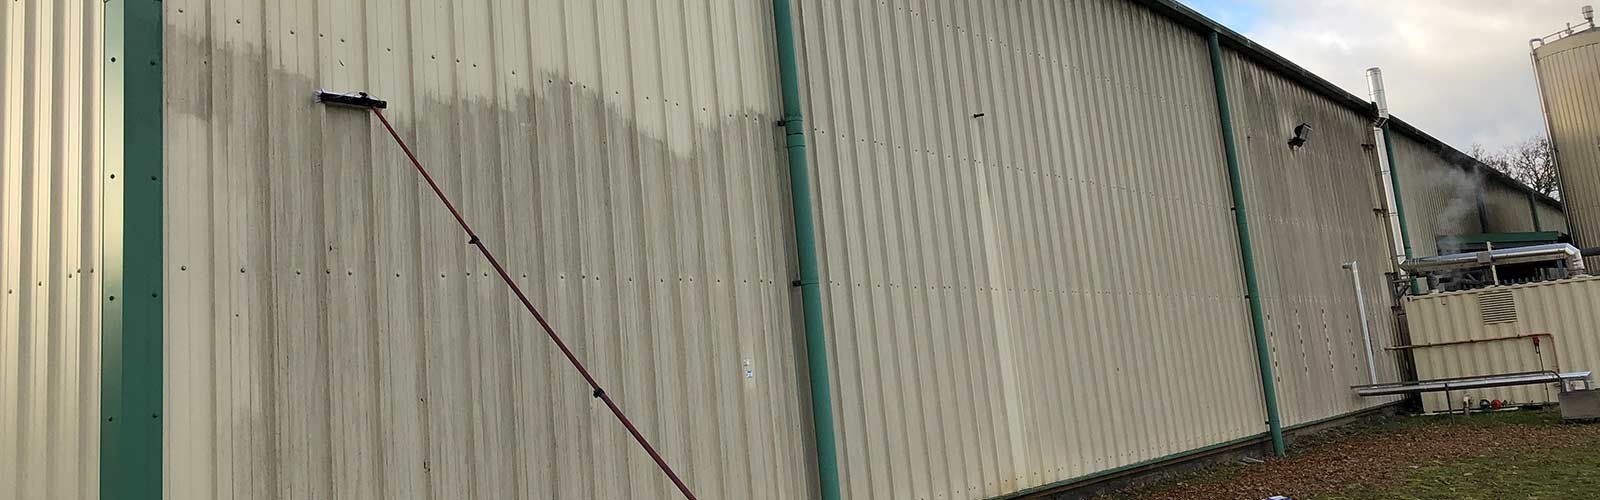 External Cladding Cleaning